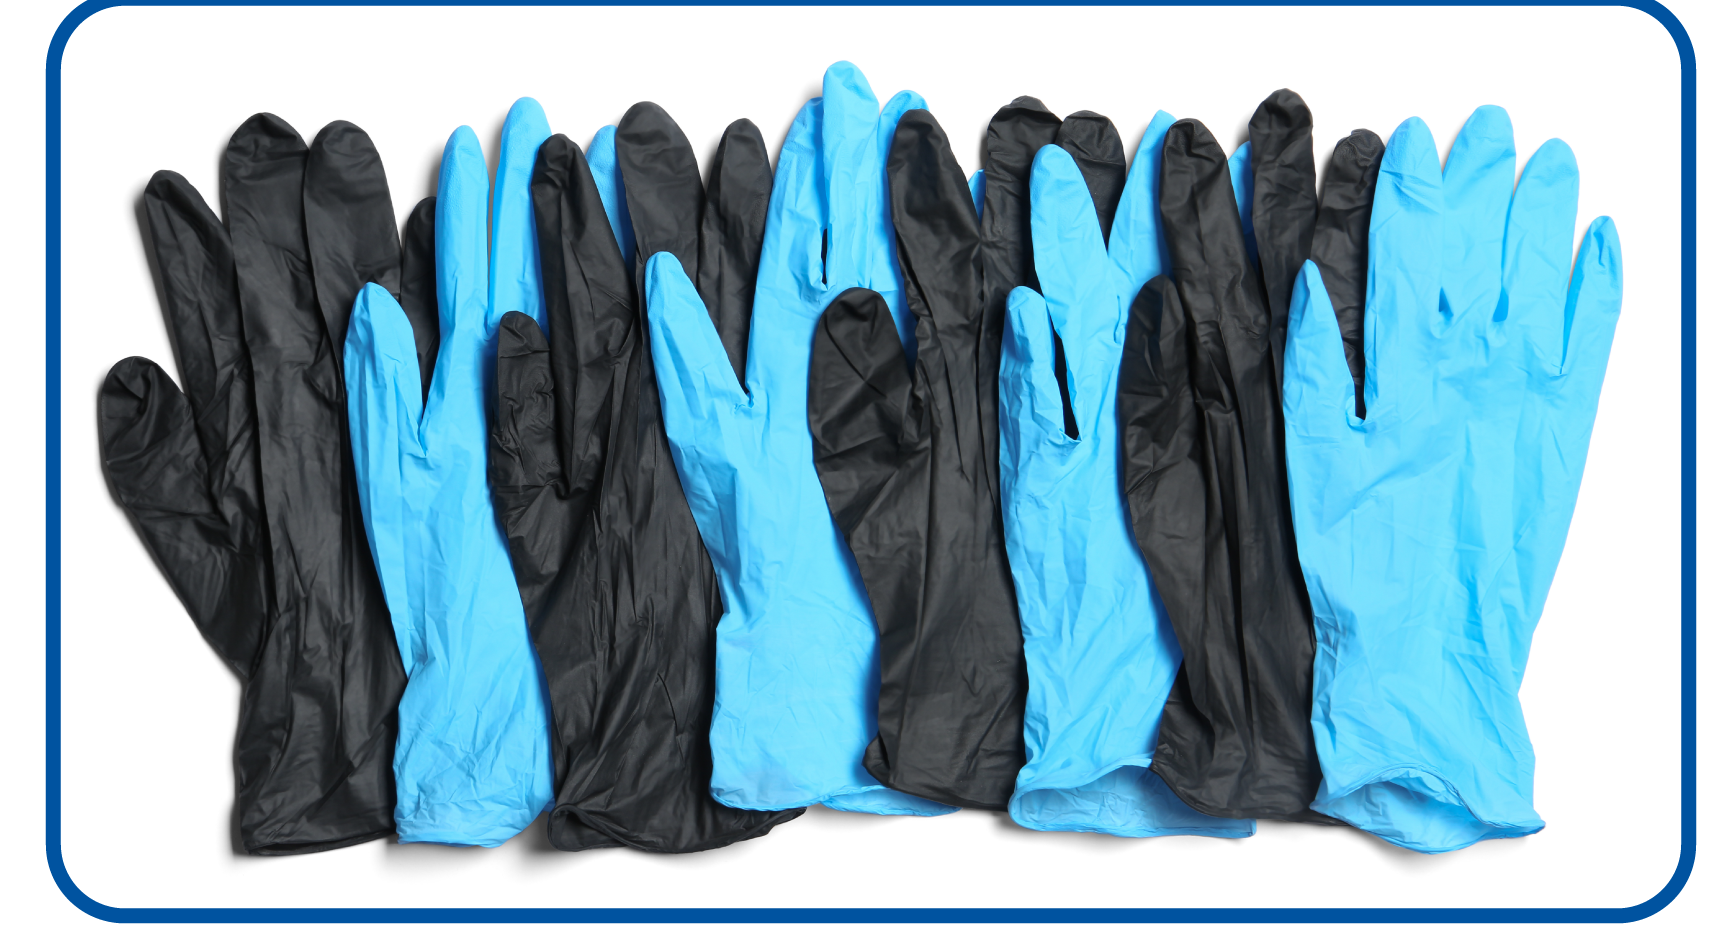 The history of disposable gloves infogrpahic